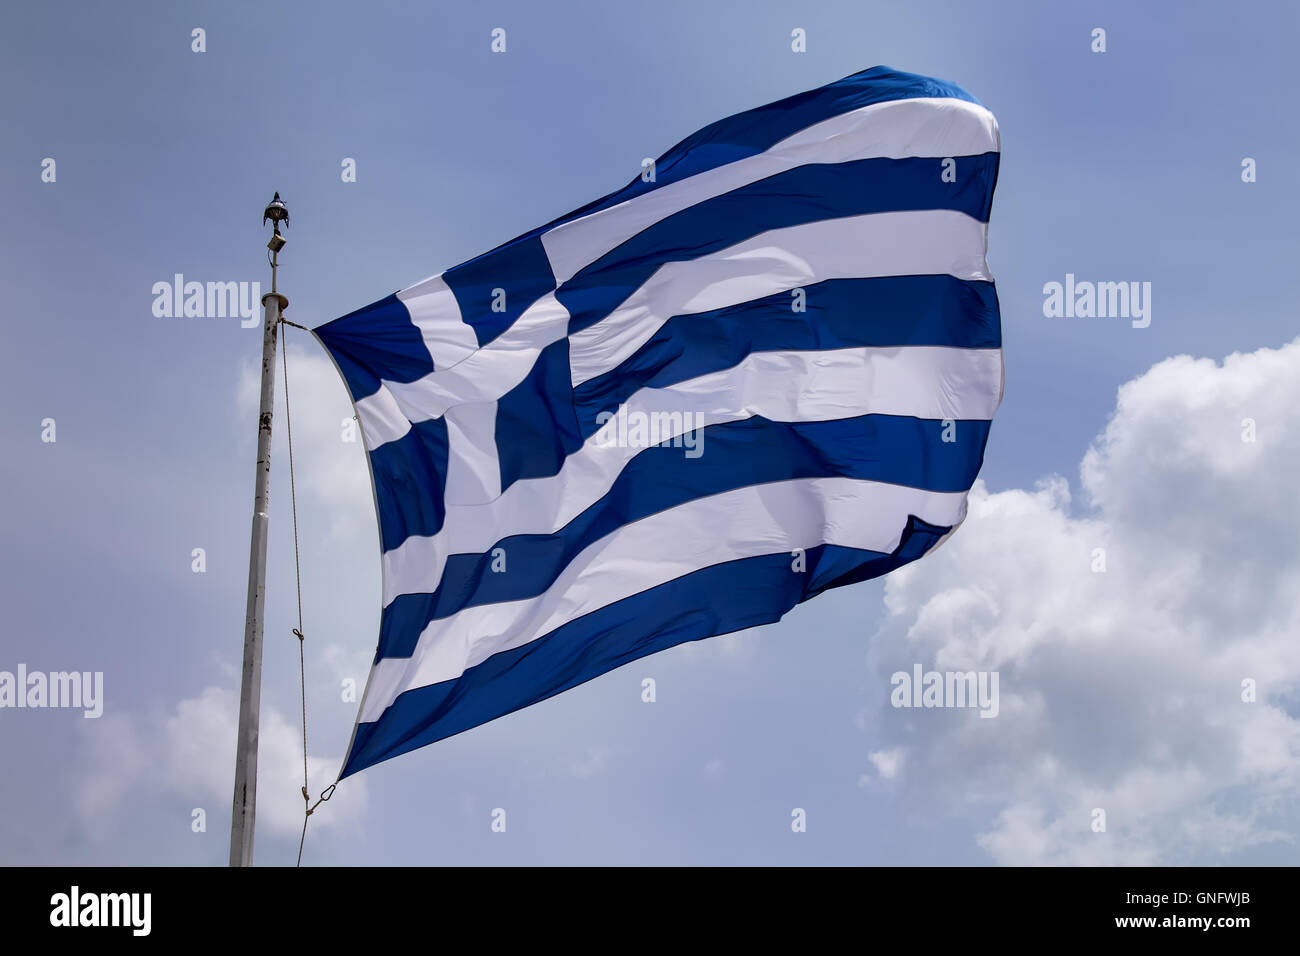 Greek flag blowing in the wind. Cloudy sky in the background. Stock Photo